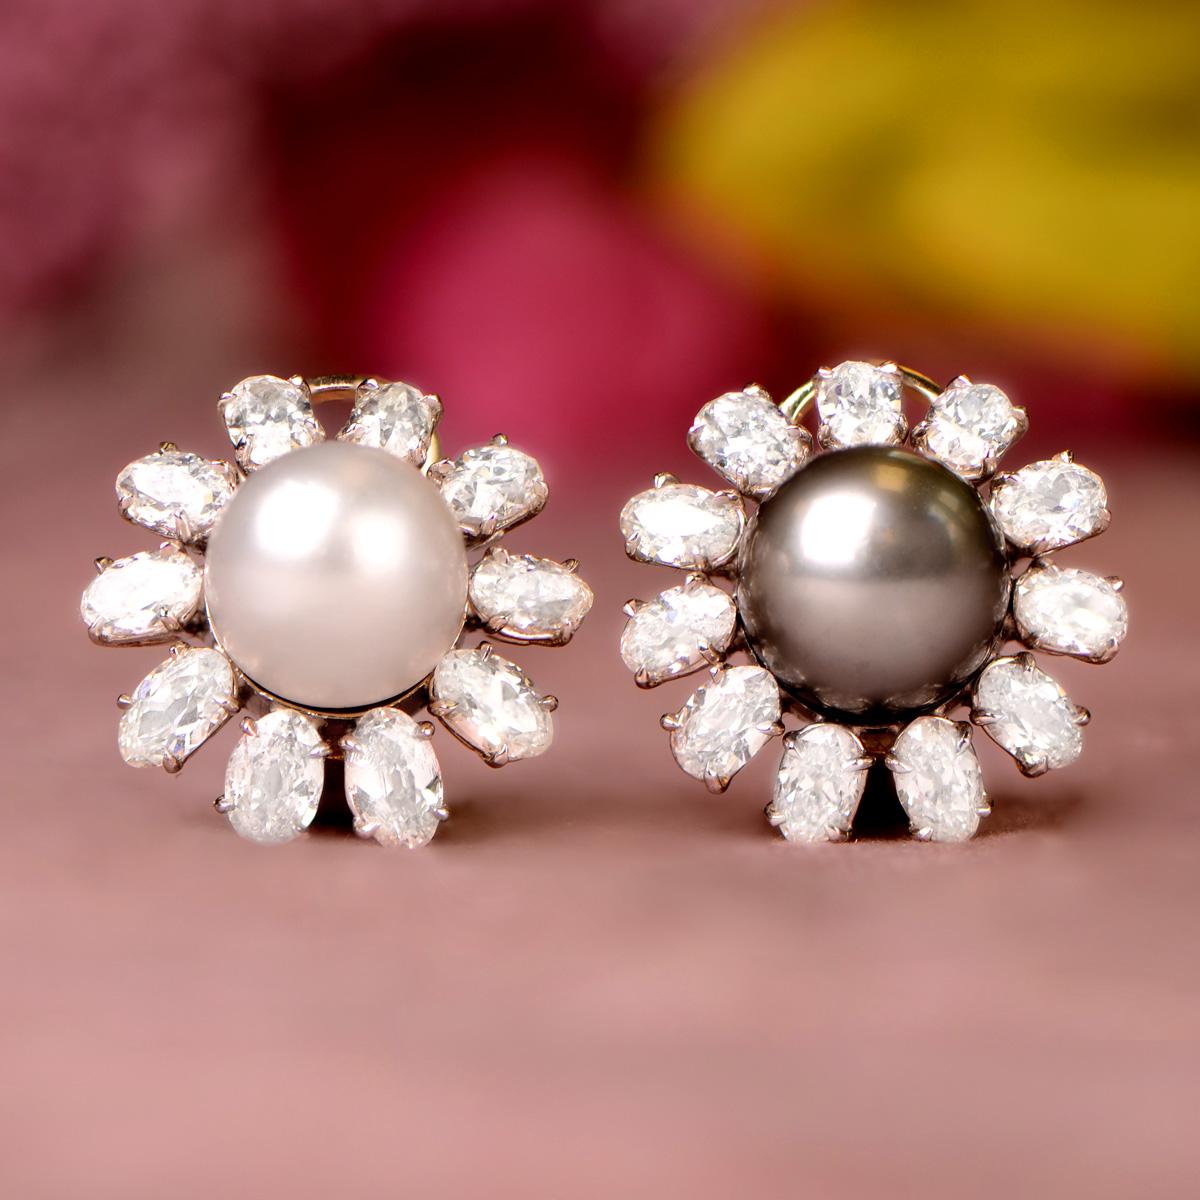 Uncut Very Rare Natural Saltwater Pearl Earrings, SSEF Certification, Grey and White For Sale